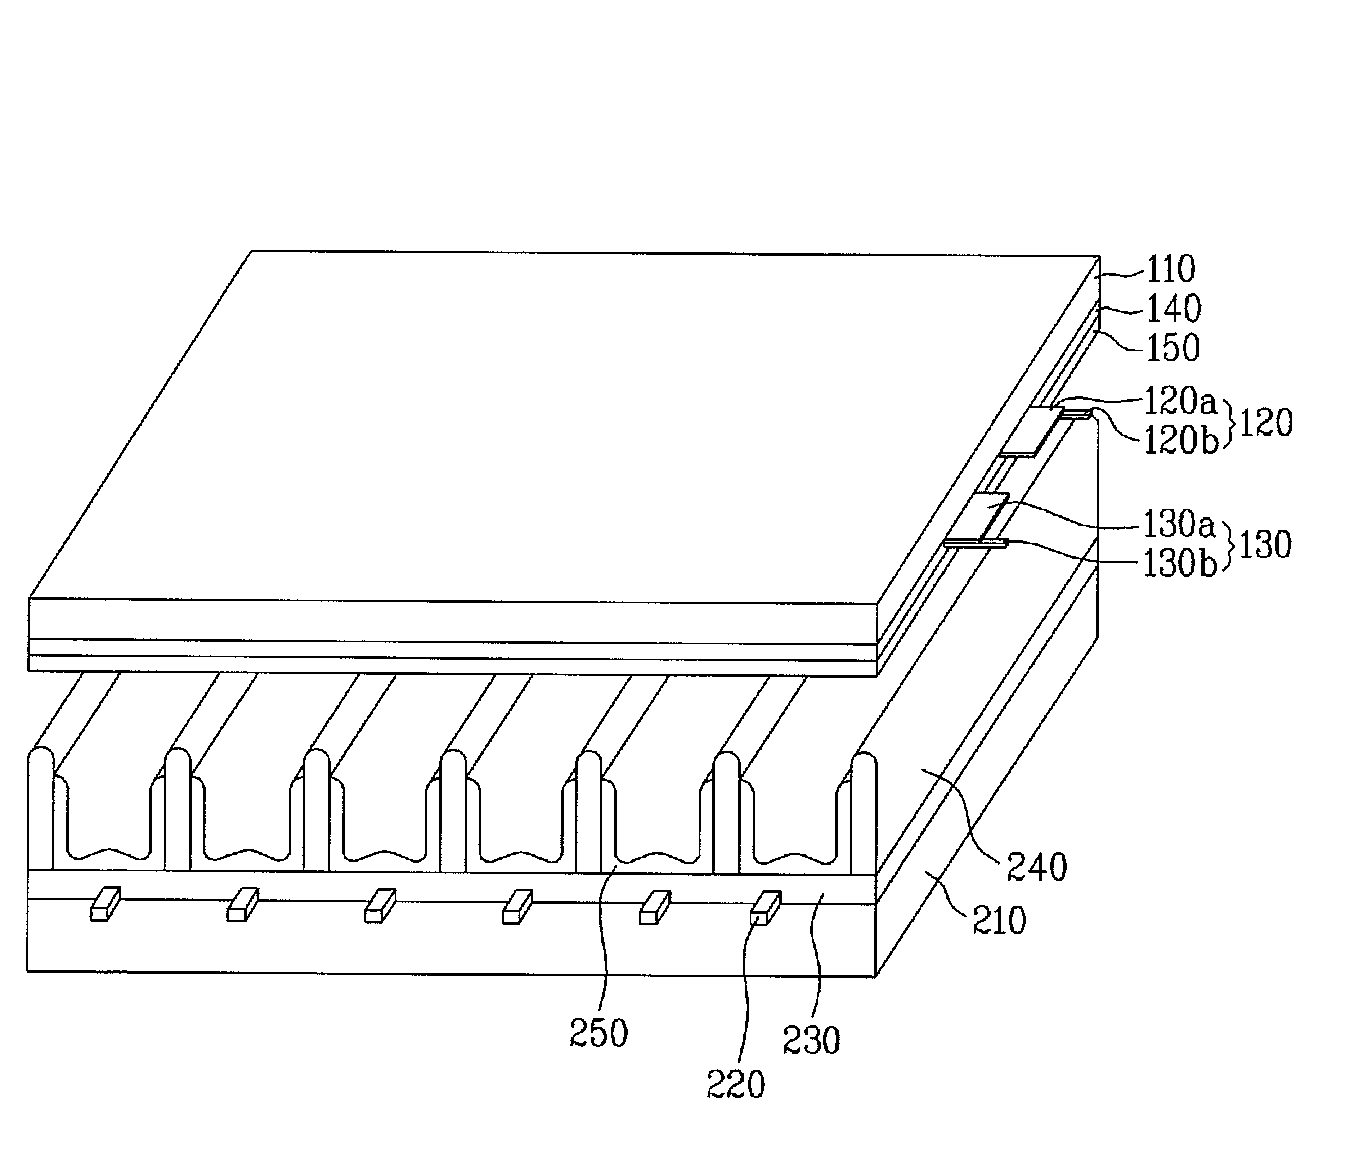 Plasma display panel, a method for manufacturing a plasma display panel, and related technologies